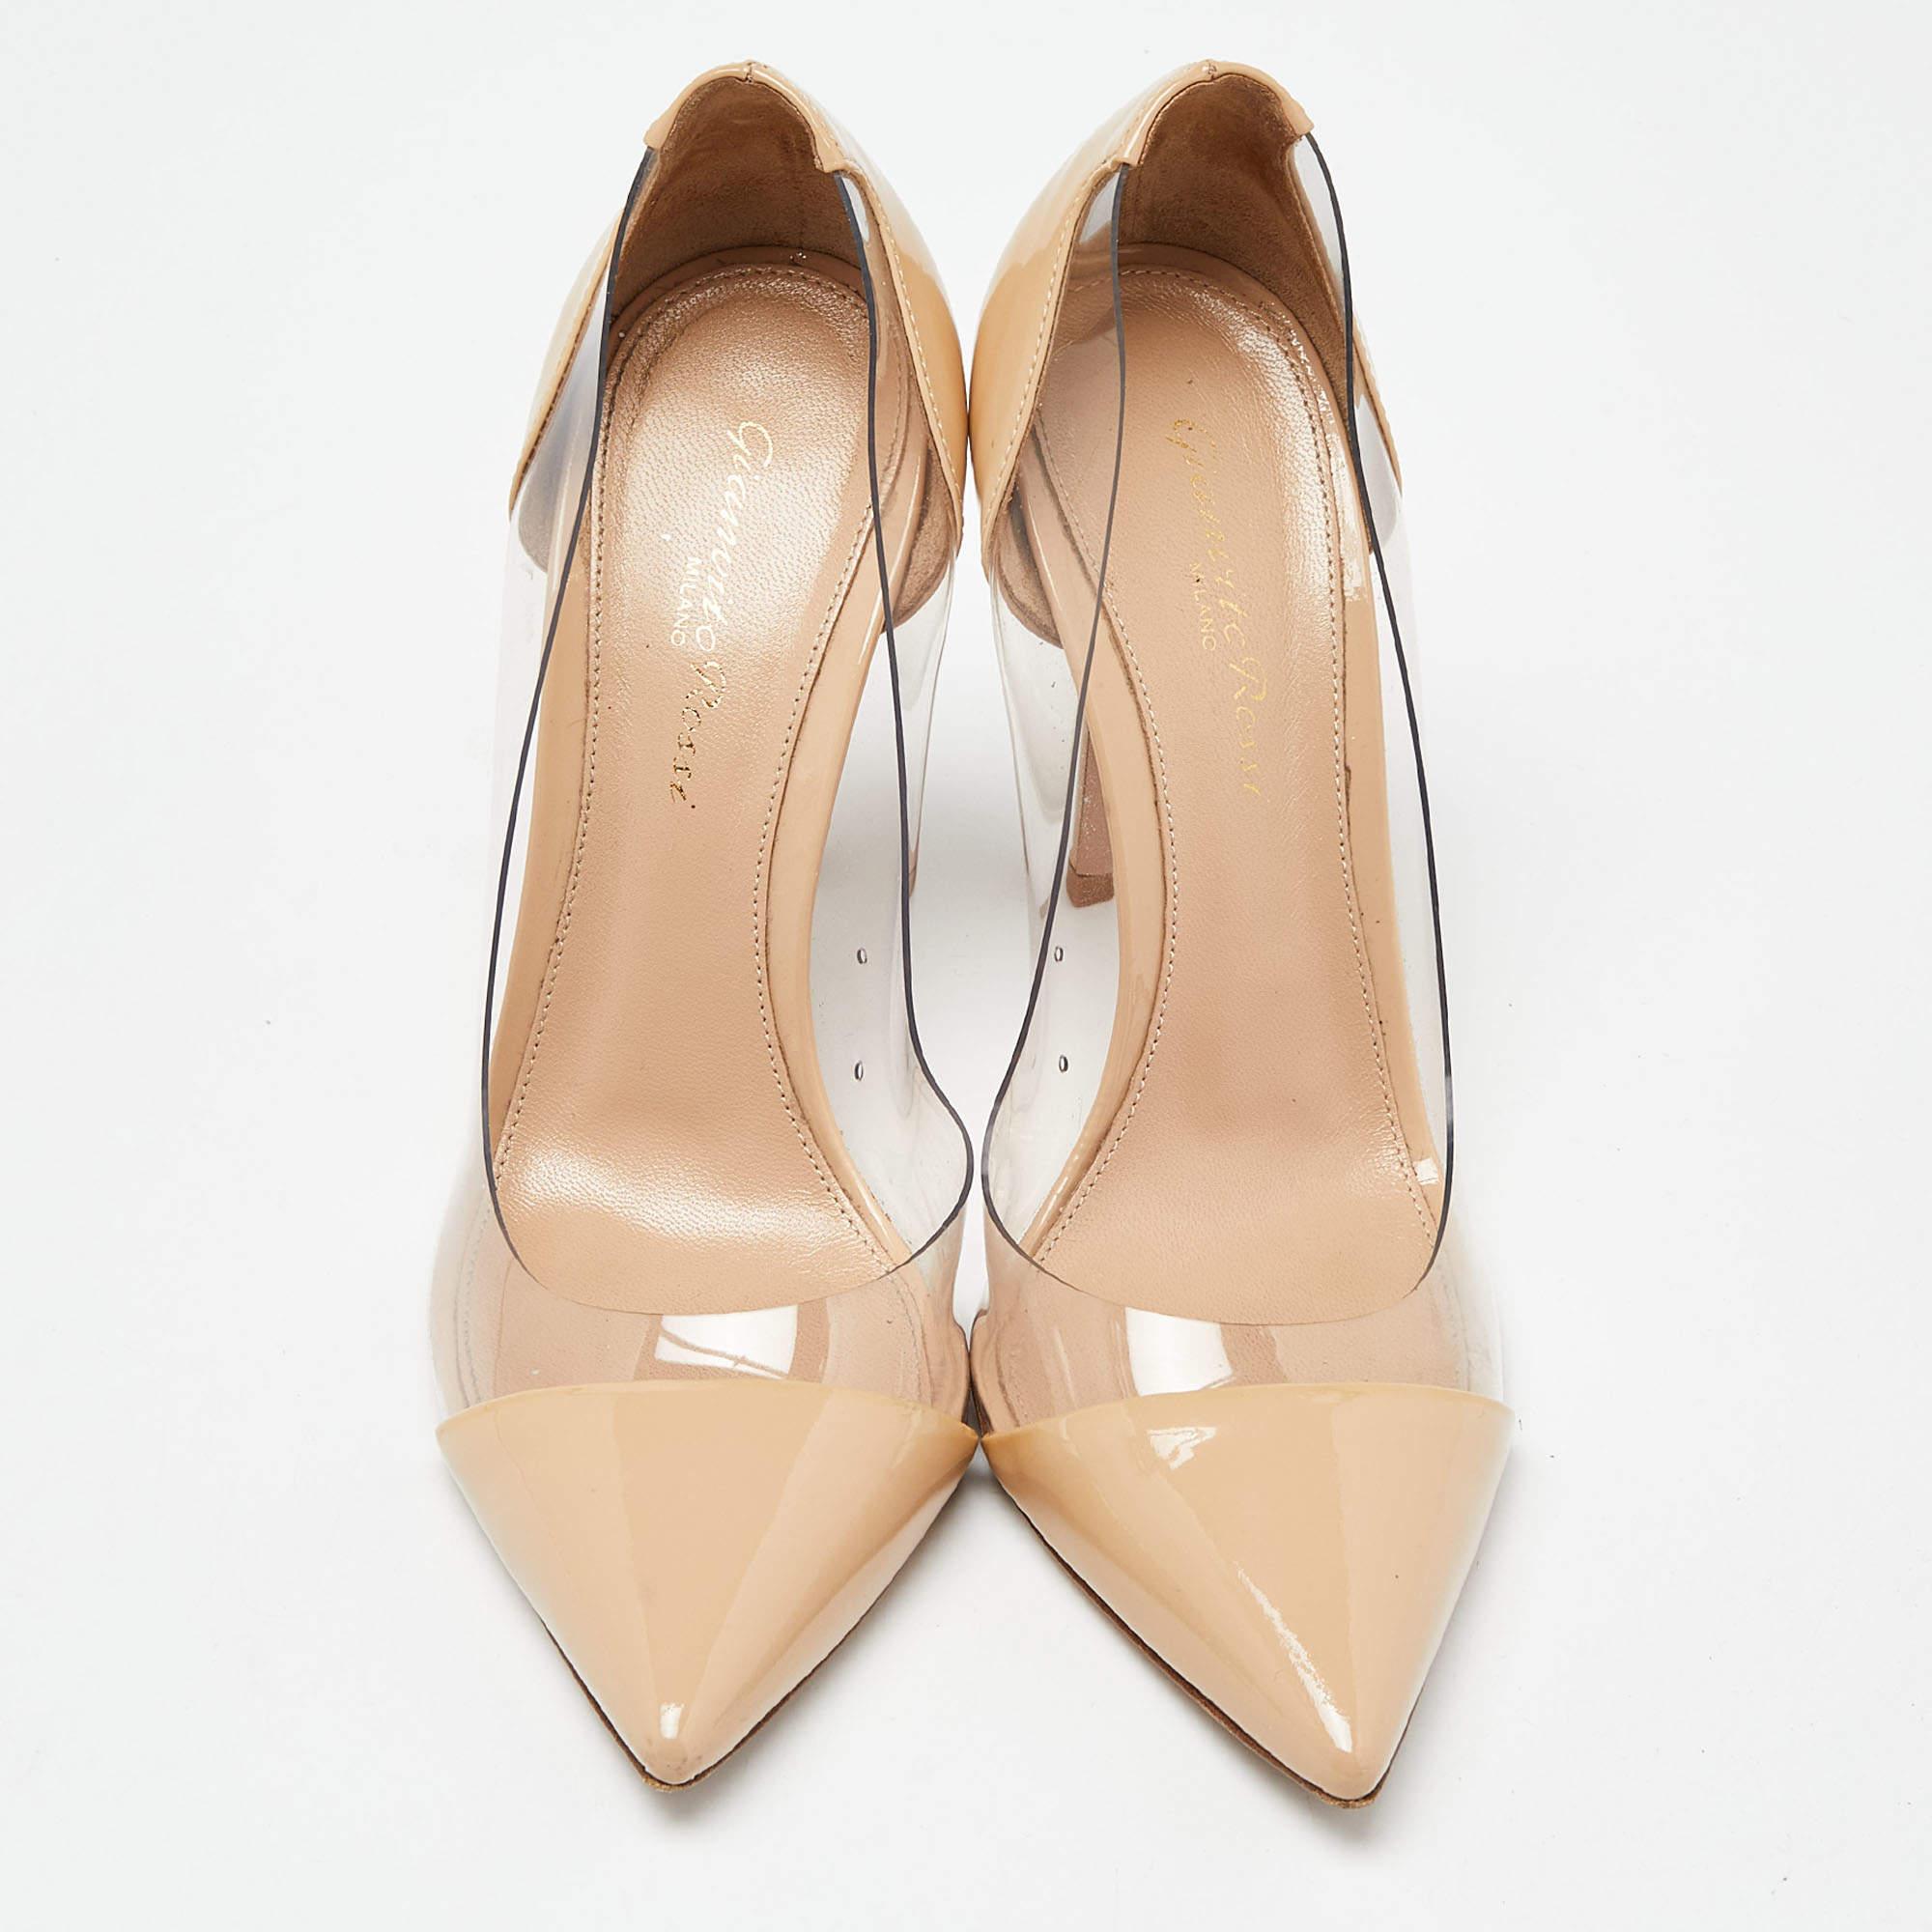 The beige shade of this pair of Gianvito Rossi pumps makes it pleasing and appealing. Created from PVC and patent leather, these shoes are articulately designed and flaunt pointed toes The 10cm heels of this pair will offer you chic and bold